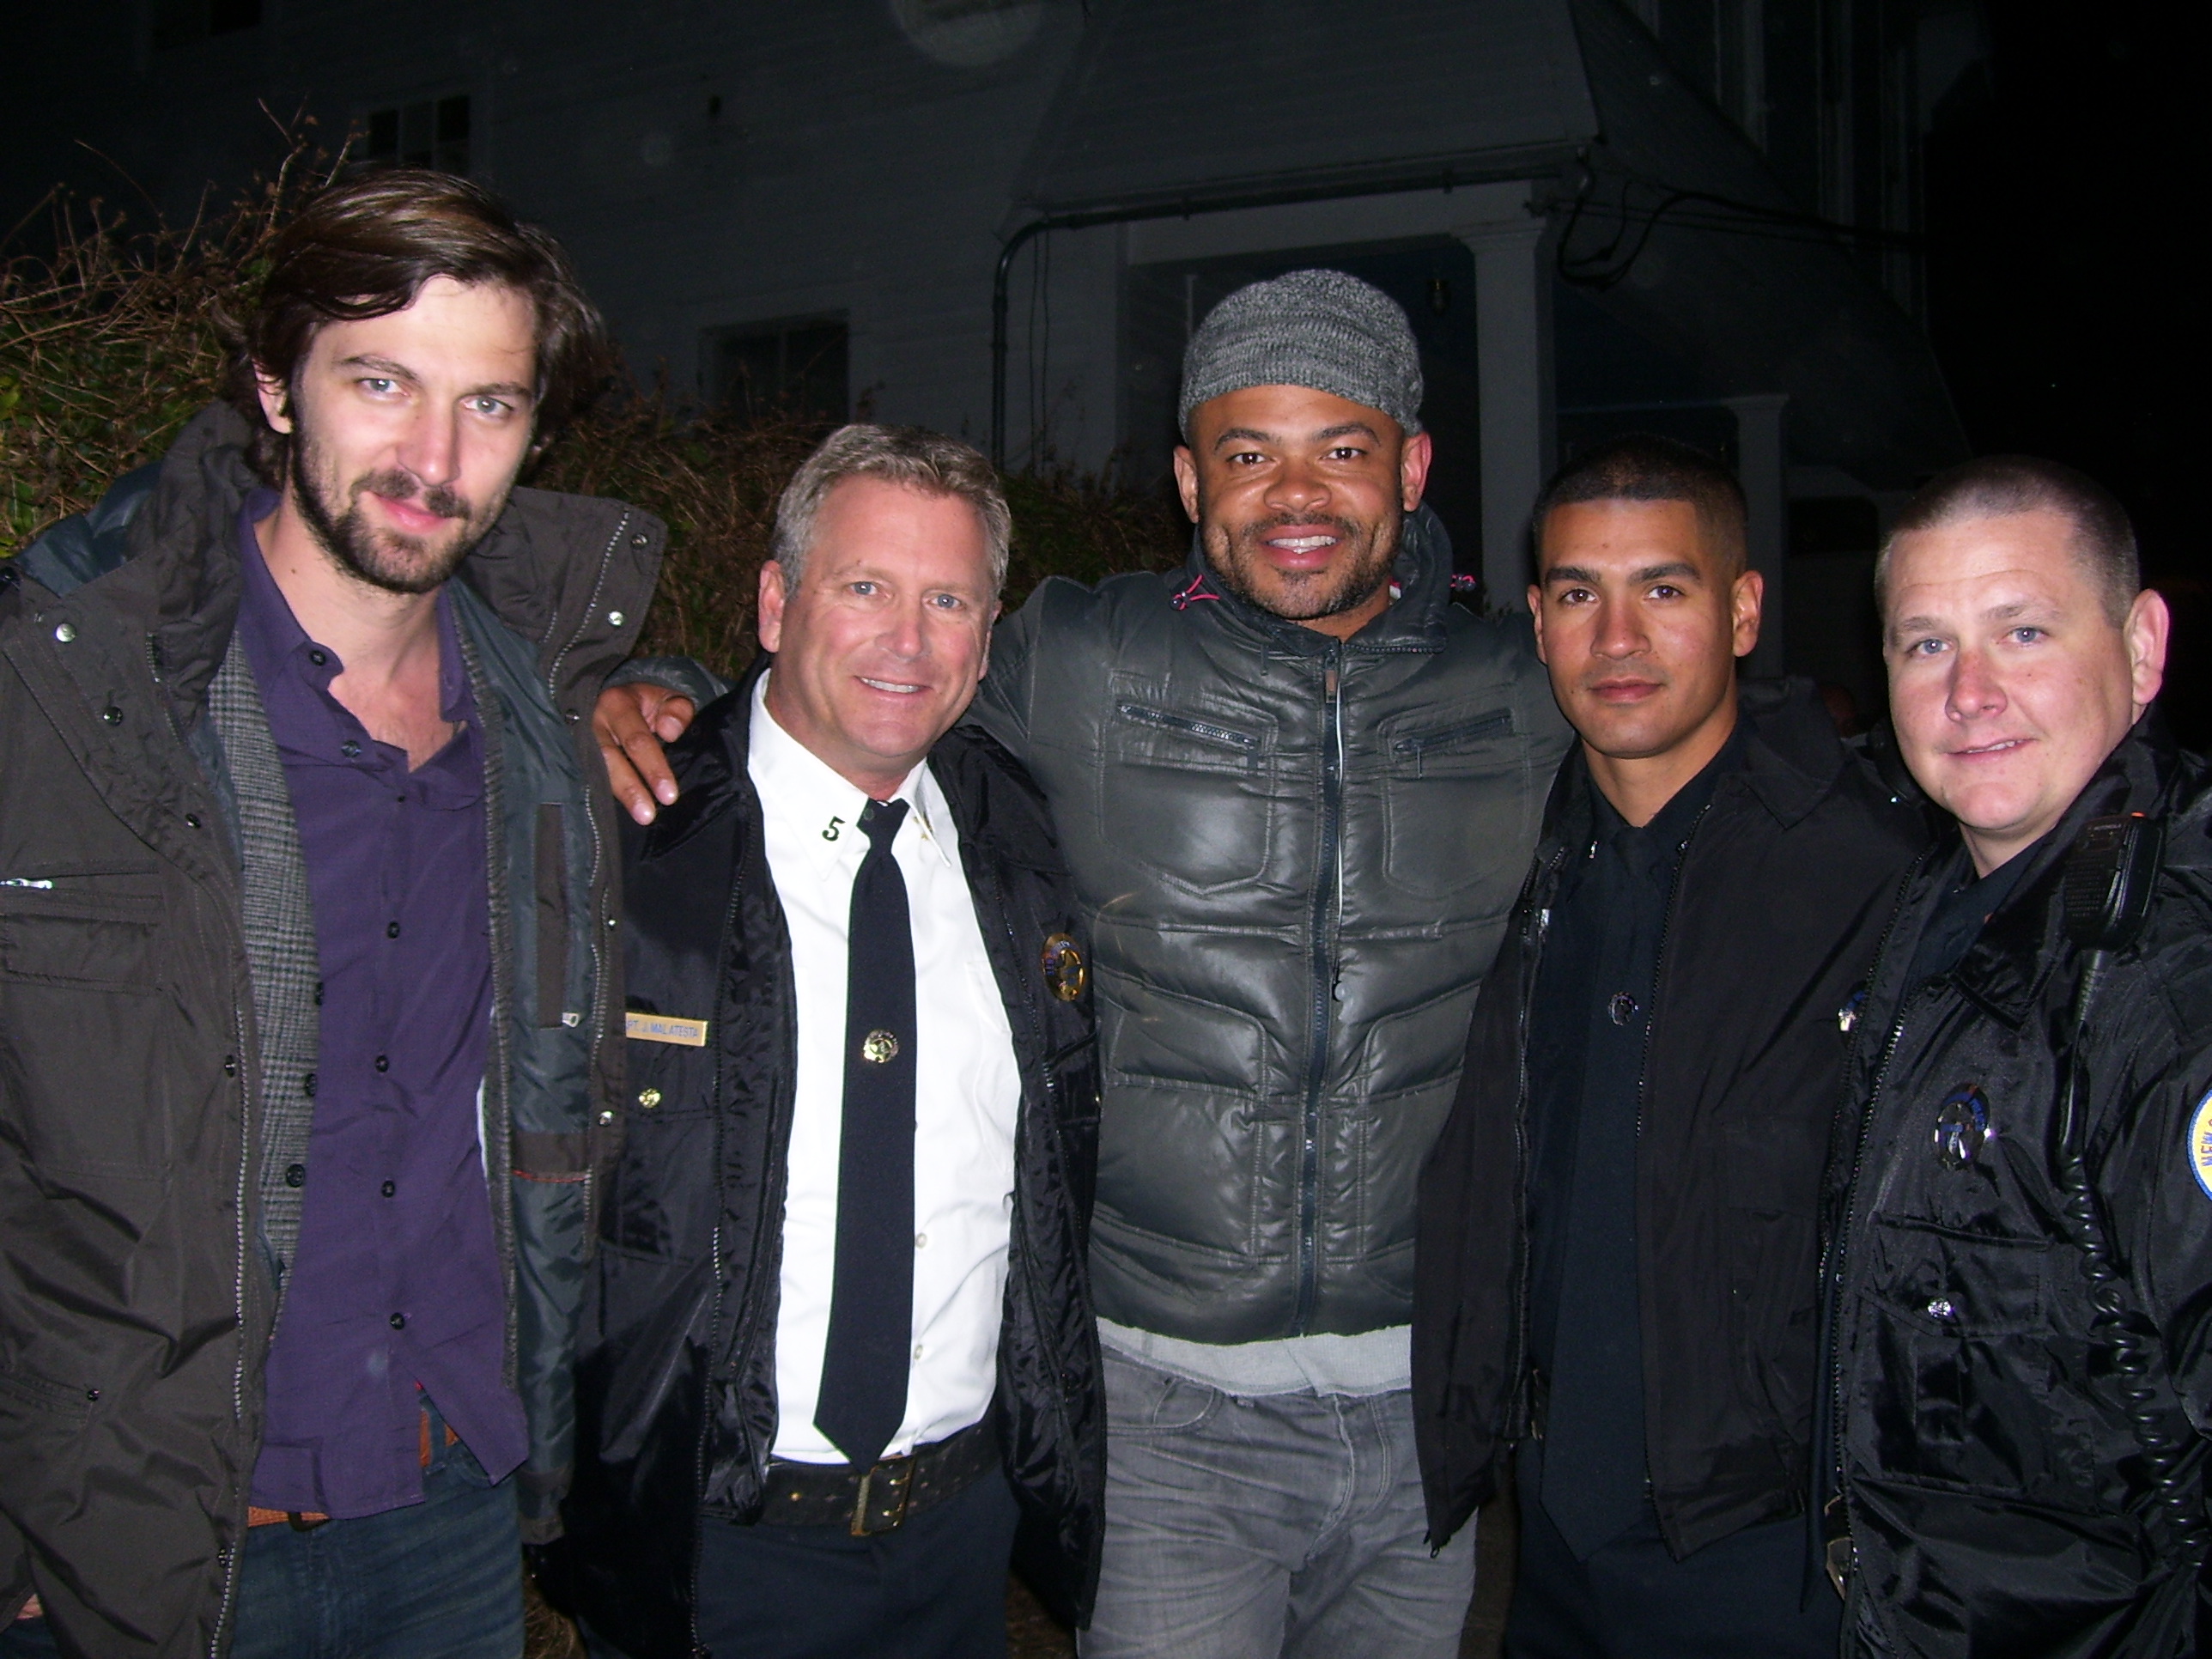 Tony Senzamici as Capt. Jack Malatesta with series regular Michiel Huisman as Sonny, Director Anthony Hemingway and 2 of New Orleans Finest, Police Officers Scott Boyington & Victor Campuzano on the set of the HBO series Treme.